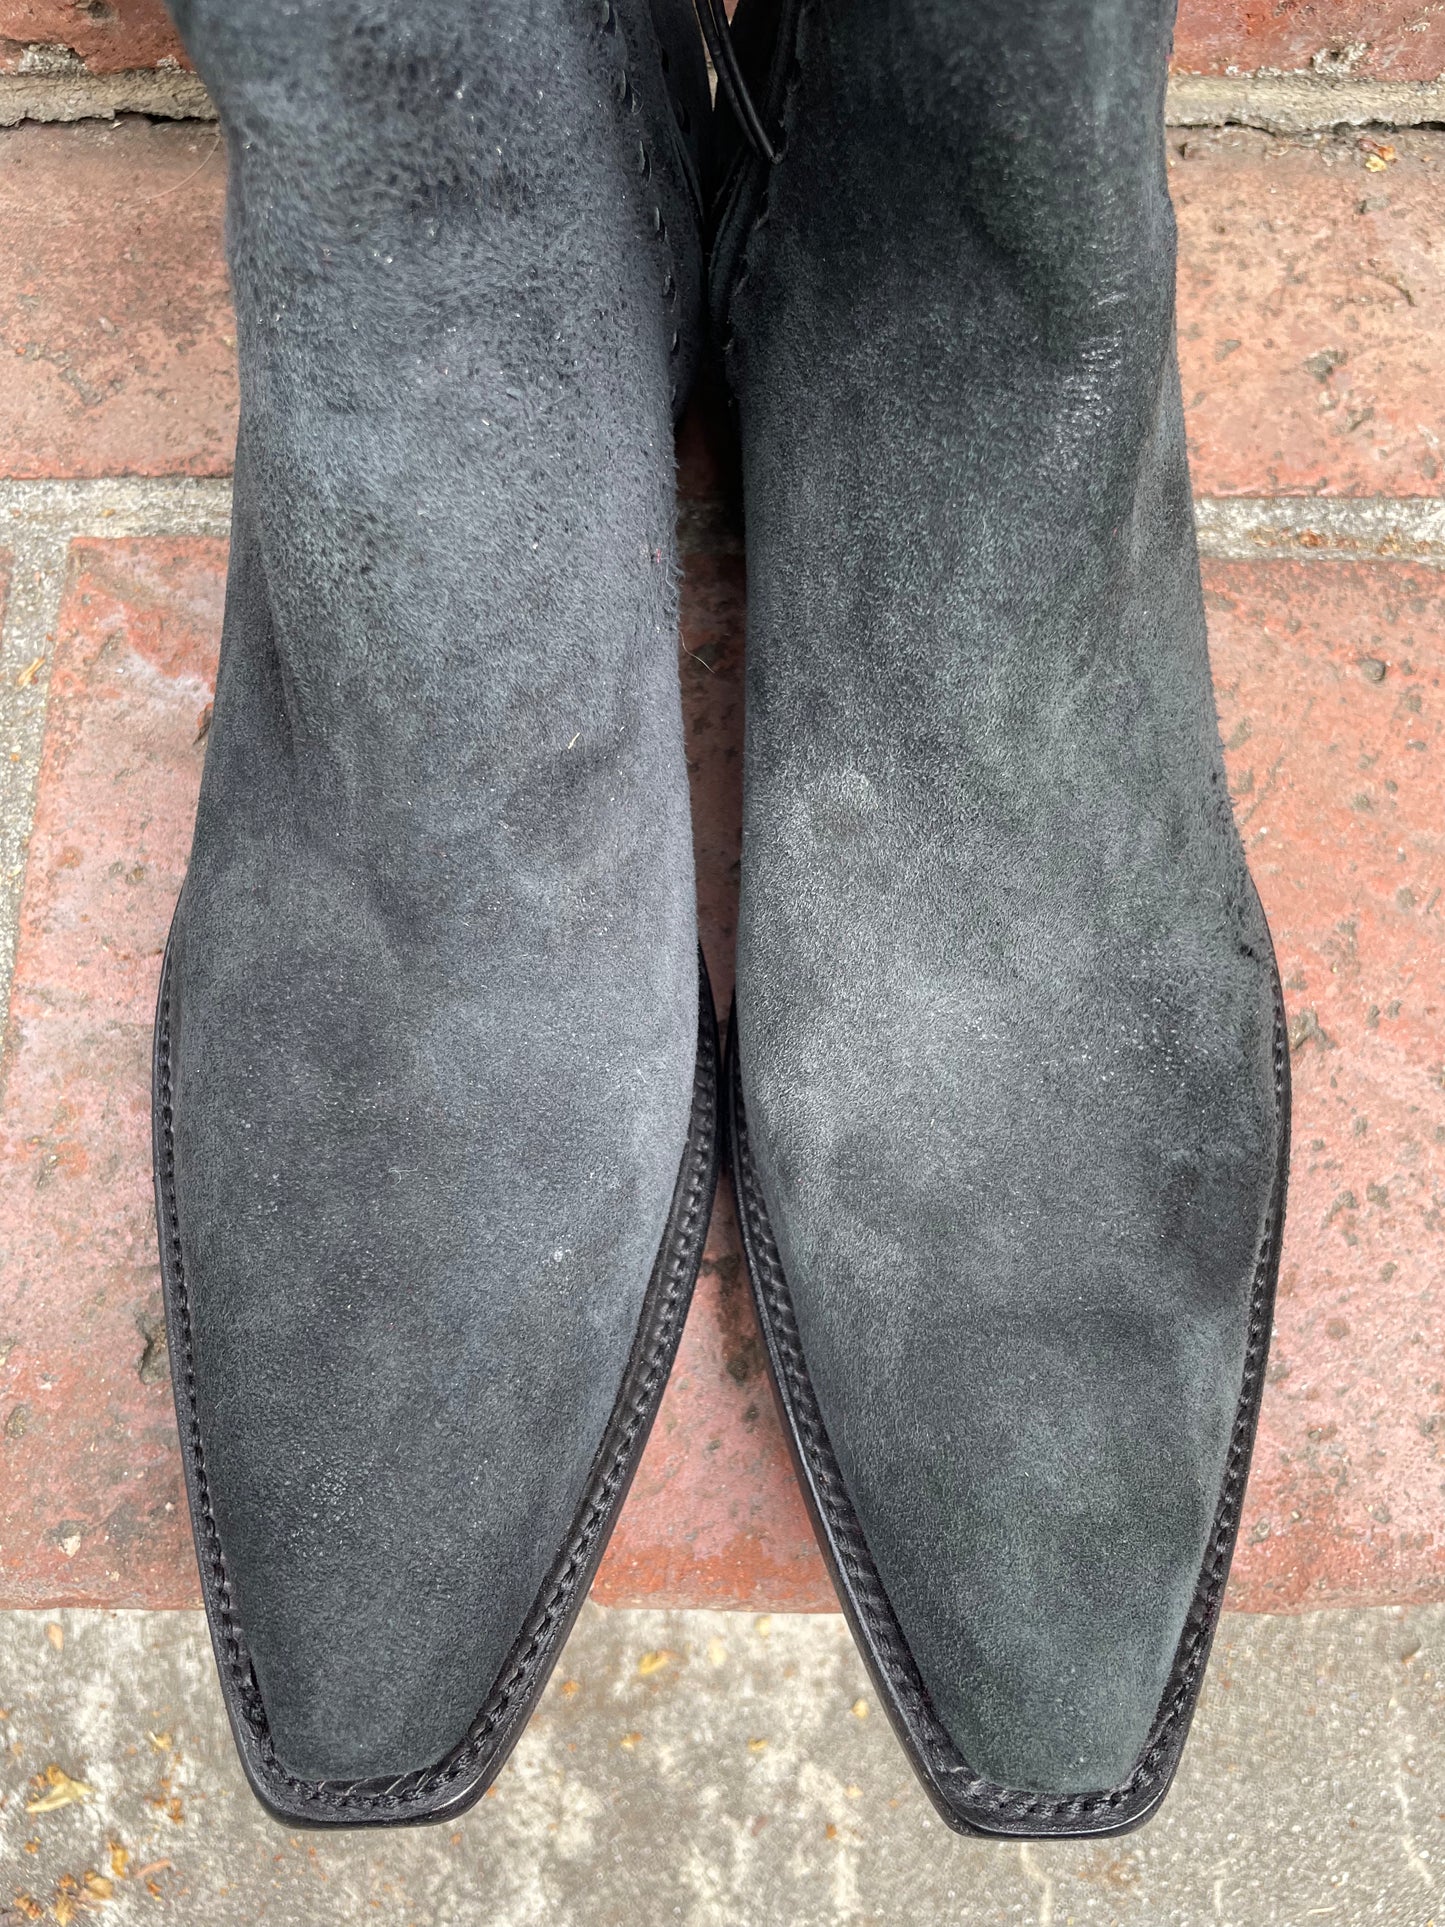 Aged Noir Lambsuede With Buckstitching